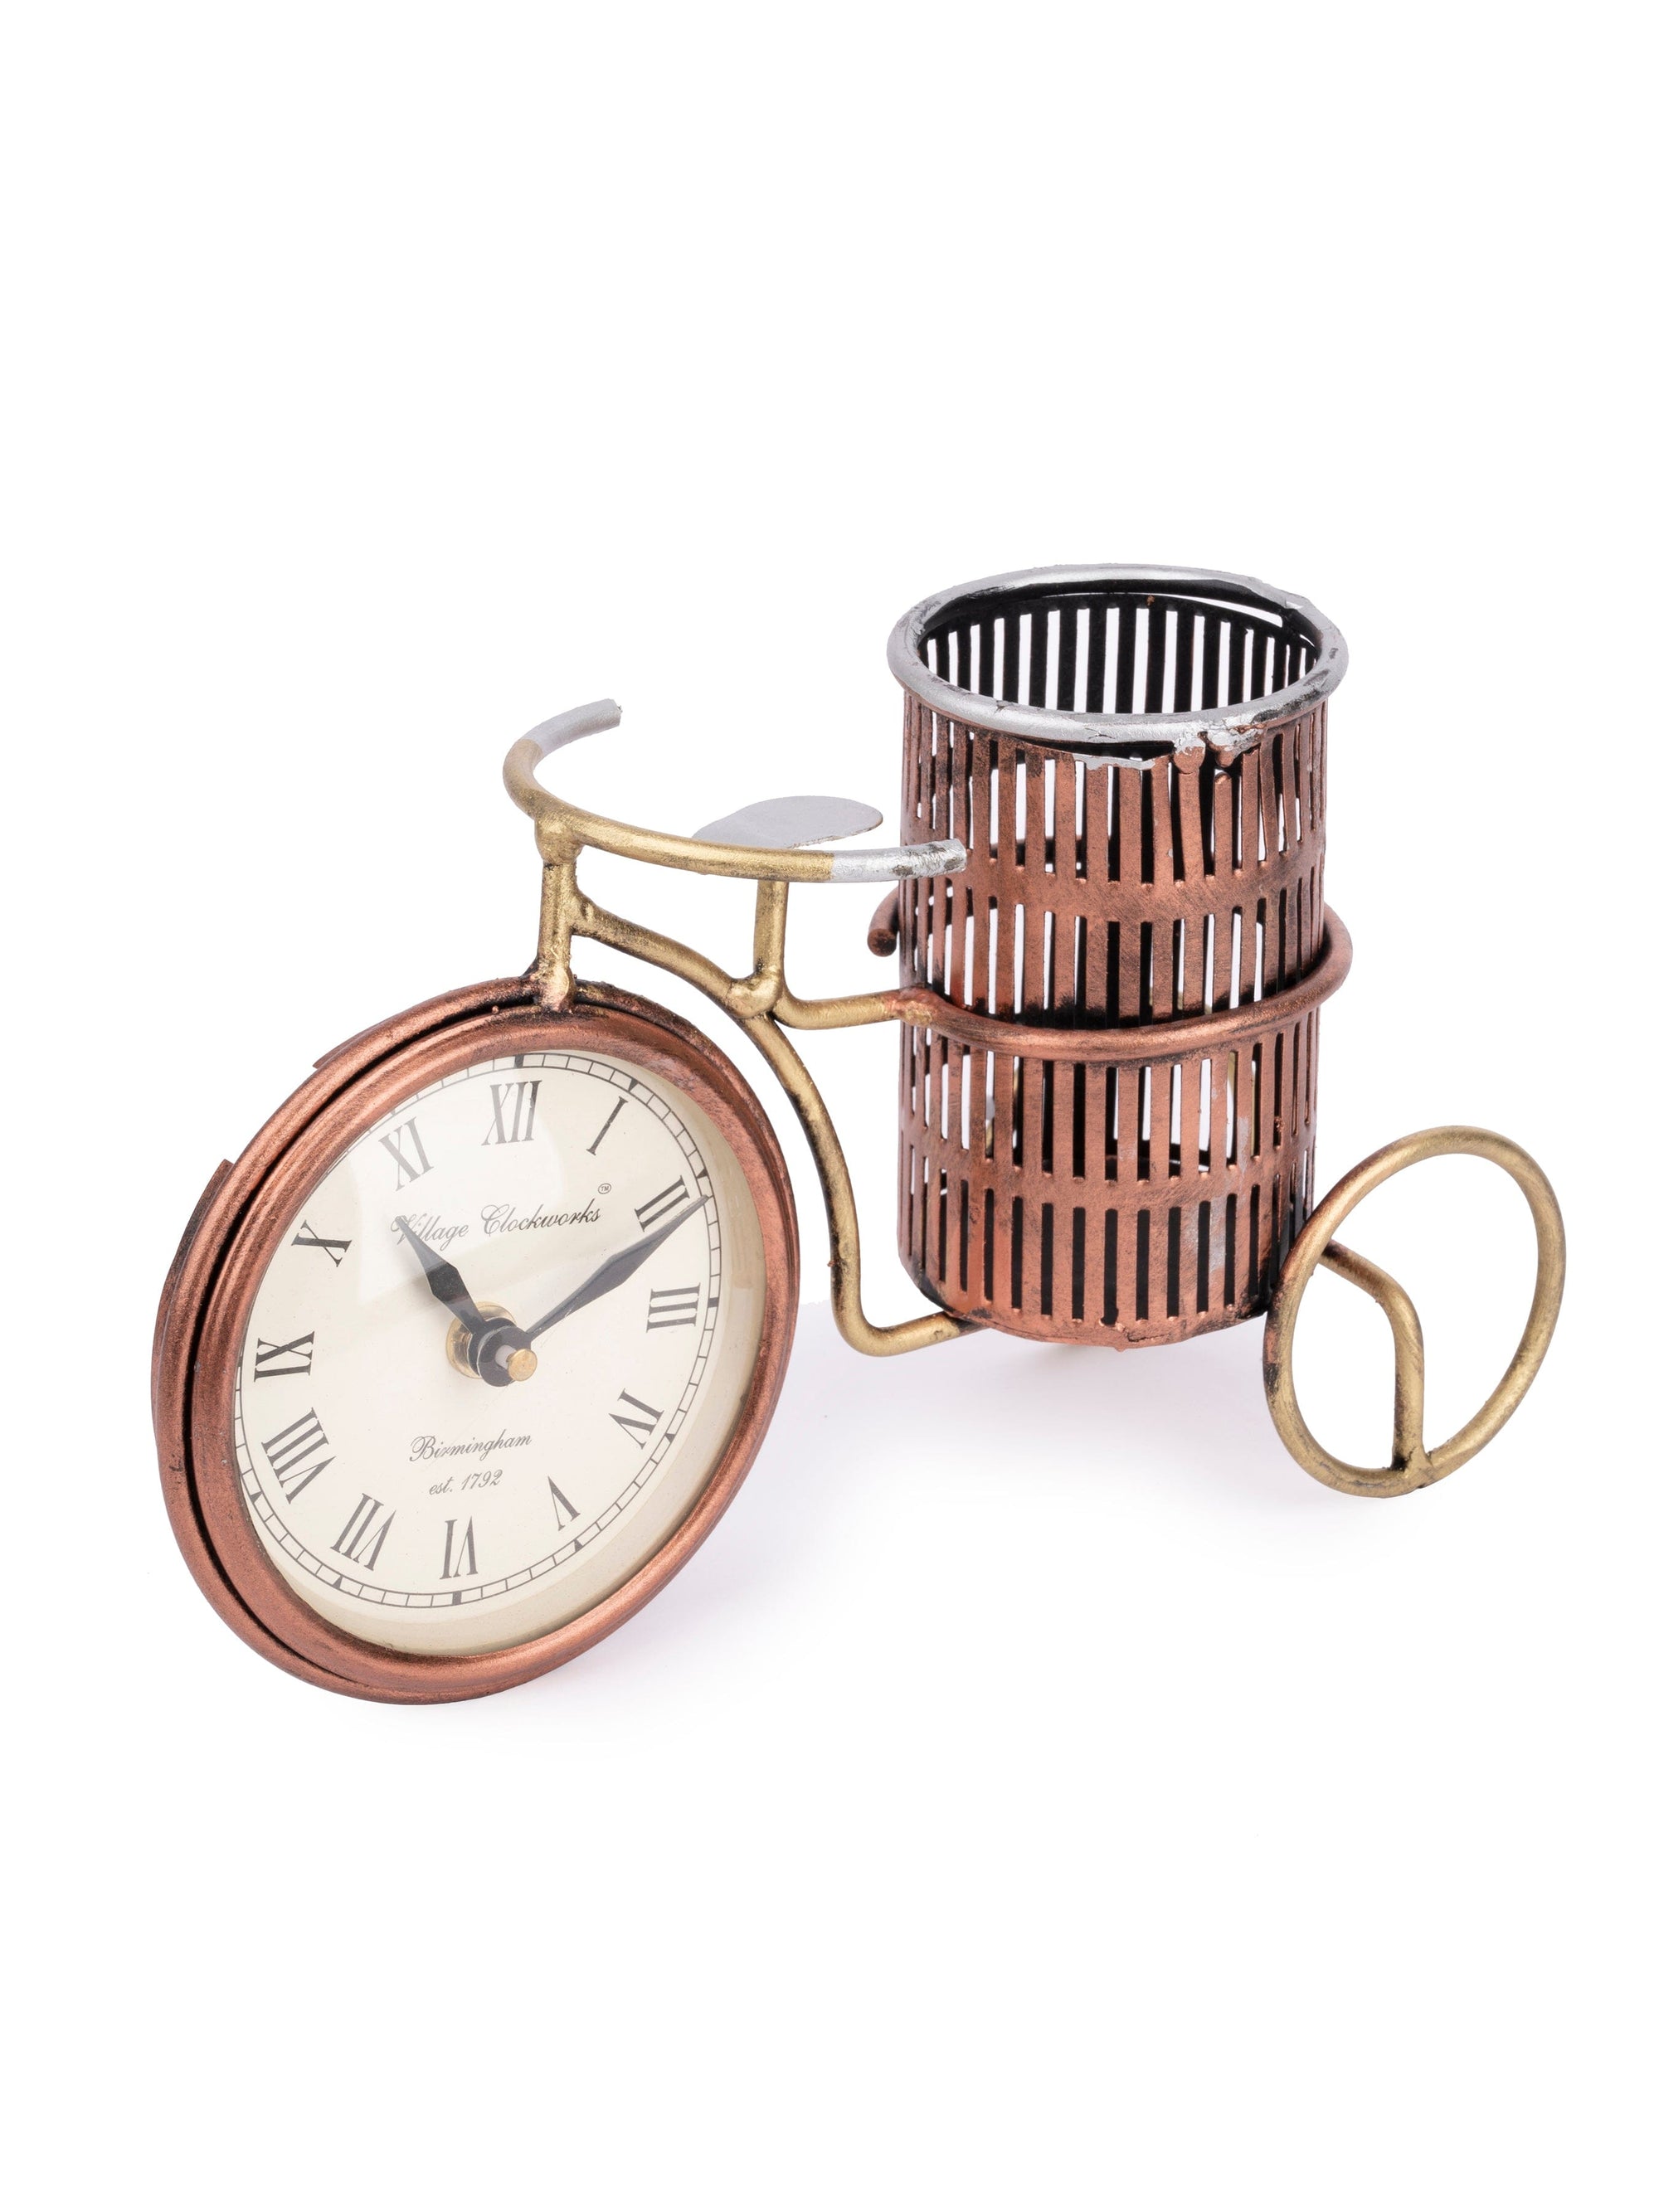 Cycle Design Pen / Pencil Holder with Clock for Desktop Use - The Heritage Artifacts